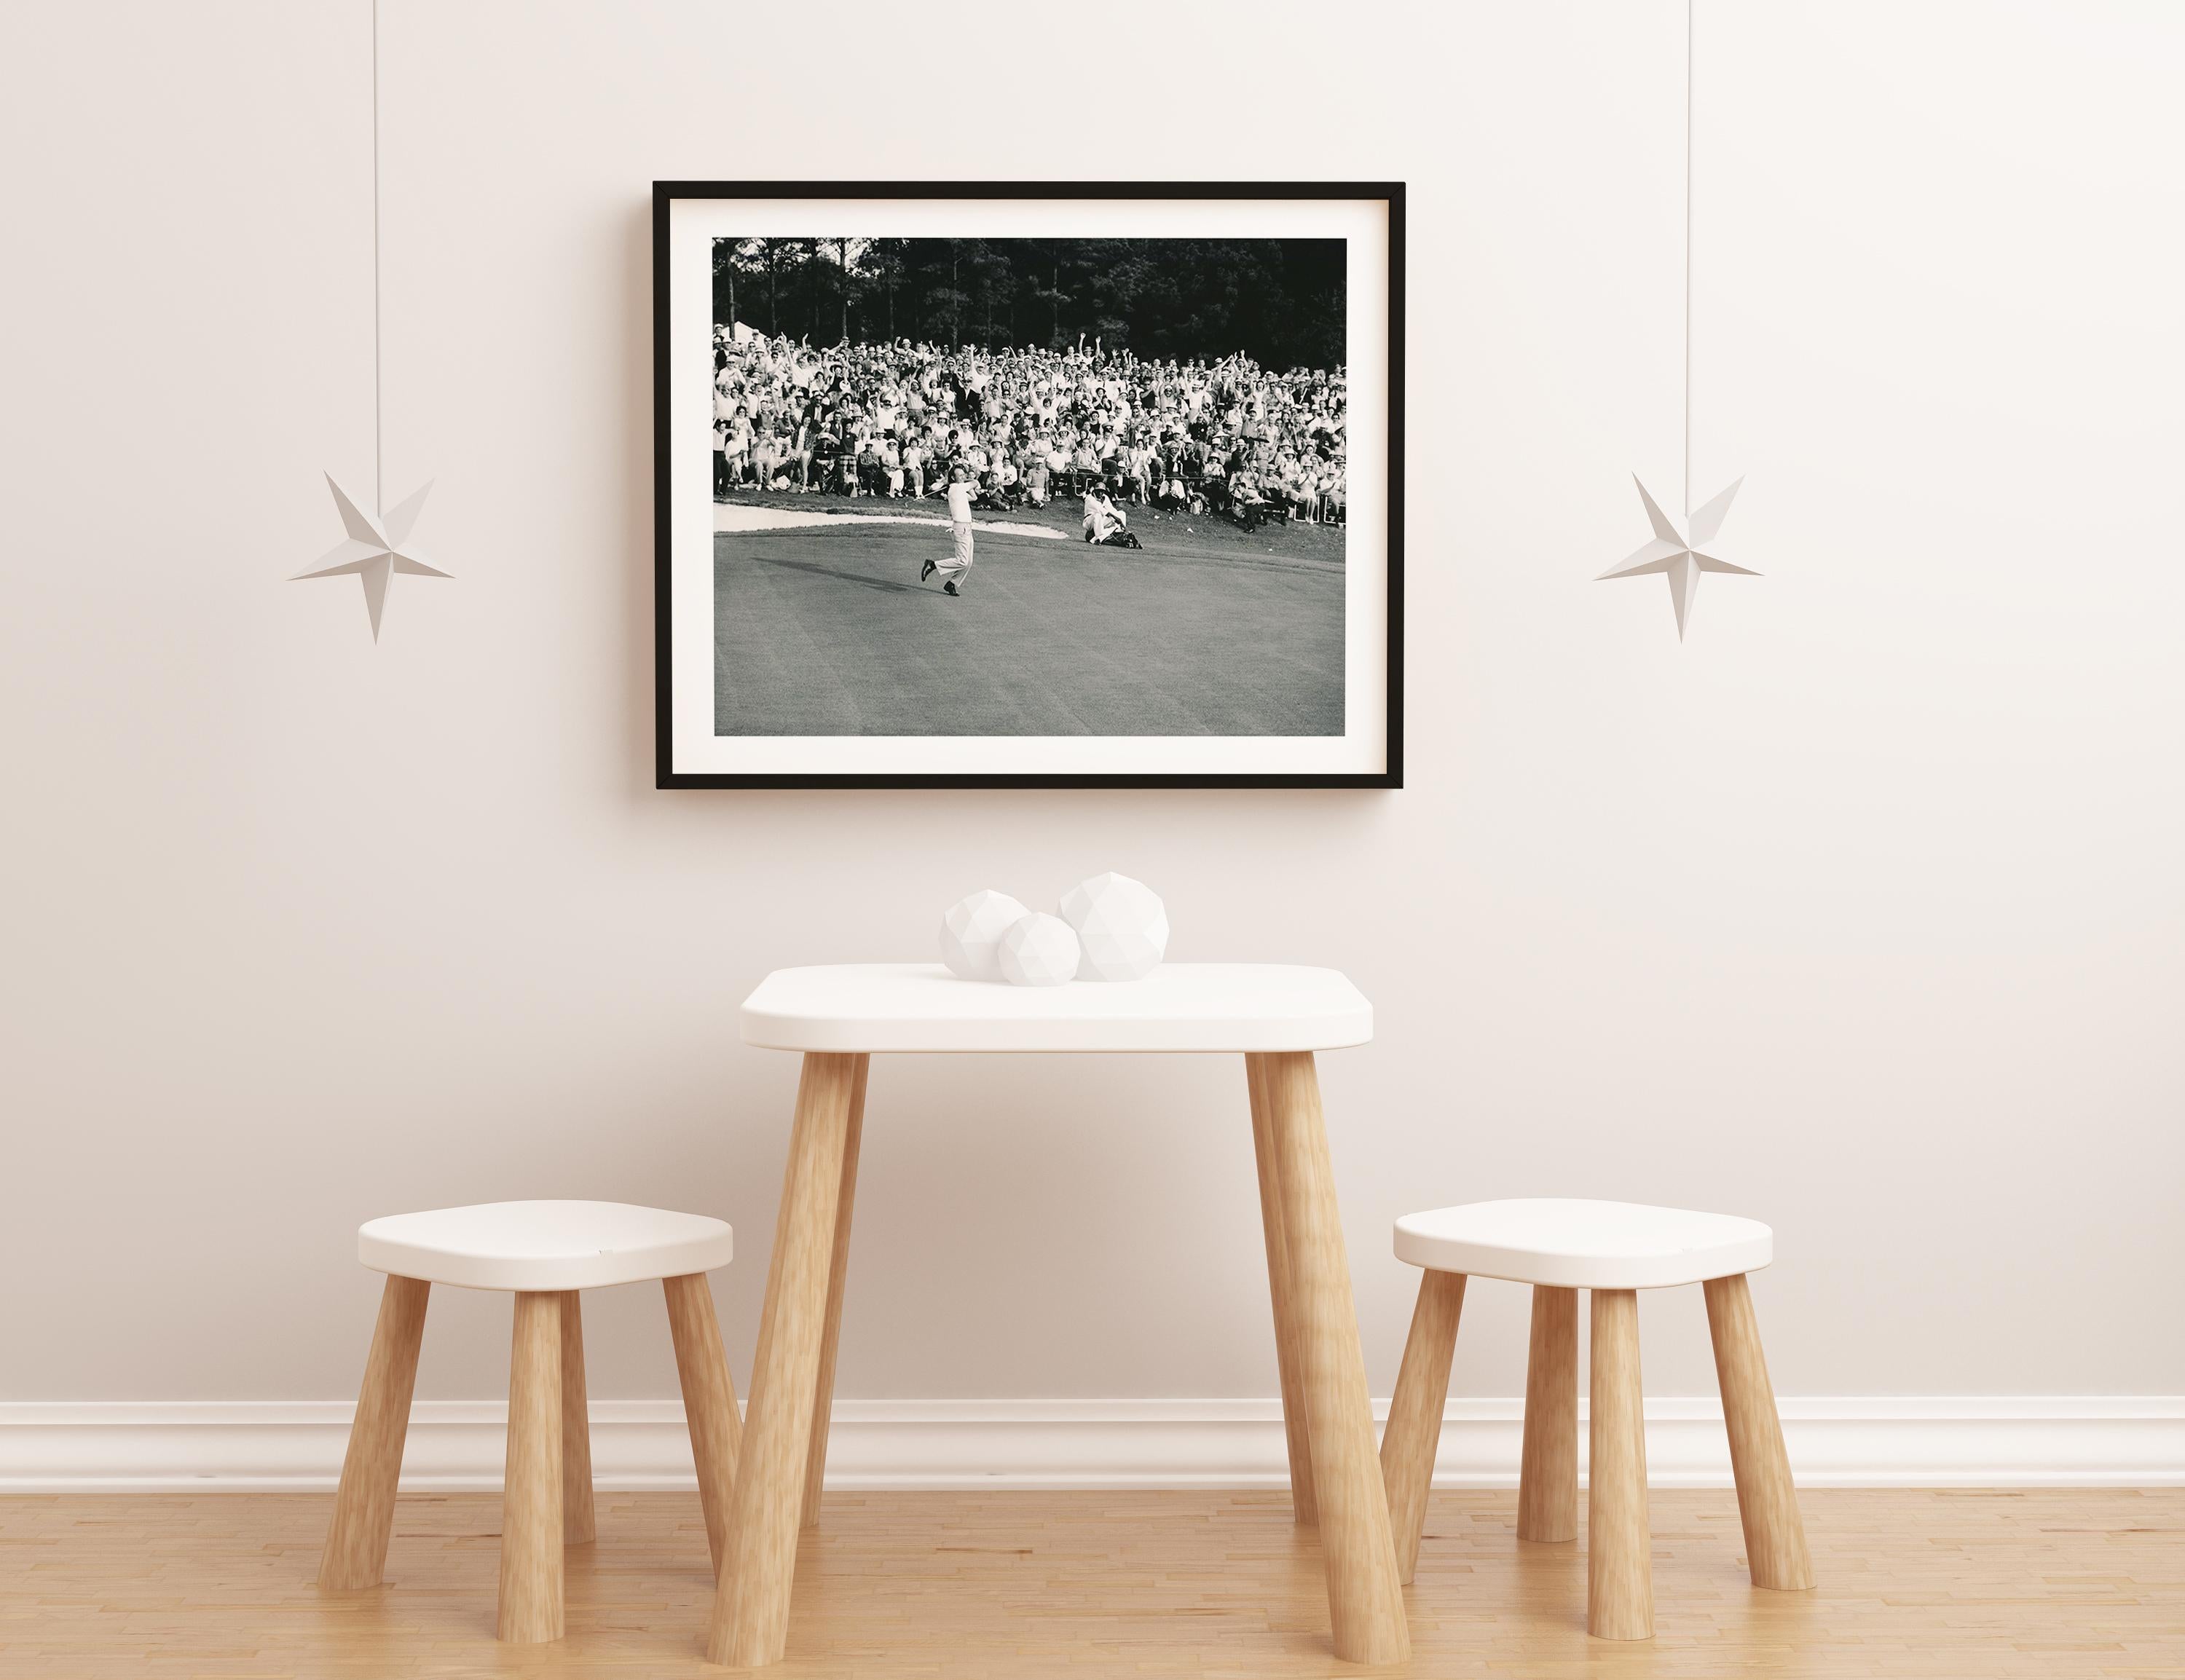 This black and white action shot features Arnold Palmer playing golf, taking a swing as the crowd looks on.

Arnold Palmer was an American professional golfer who is generally regarded as one of the greatest and most charismatic players in the